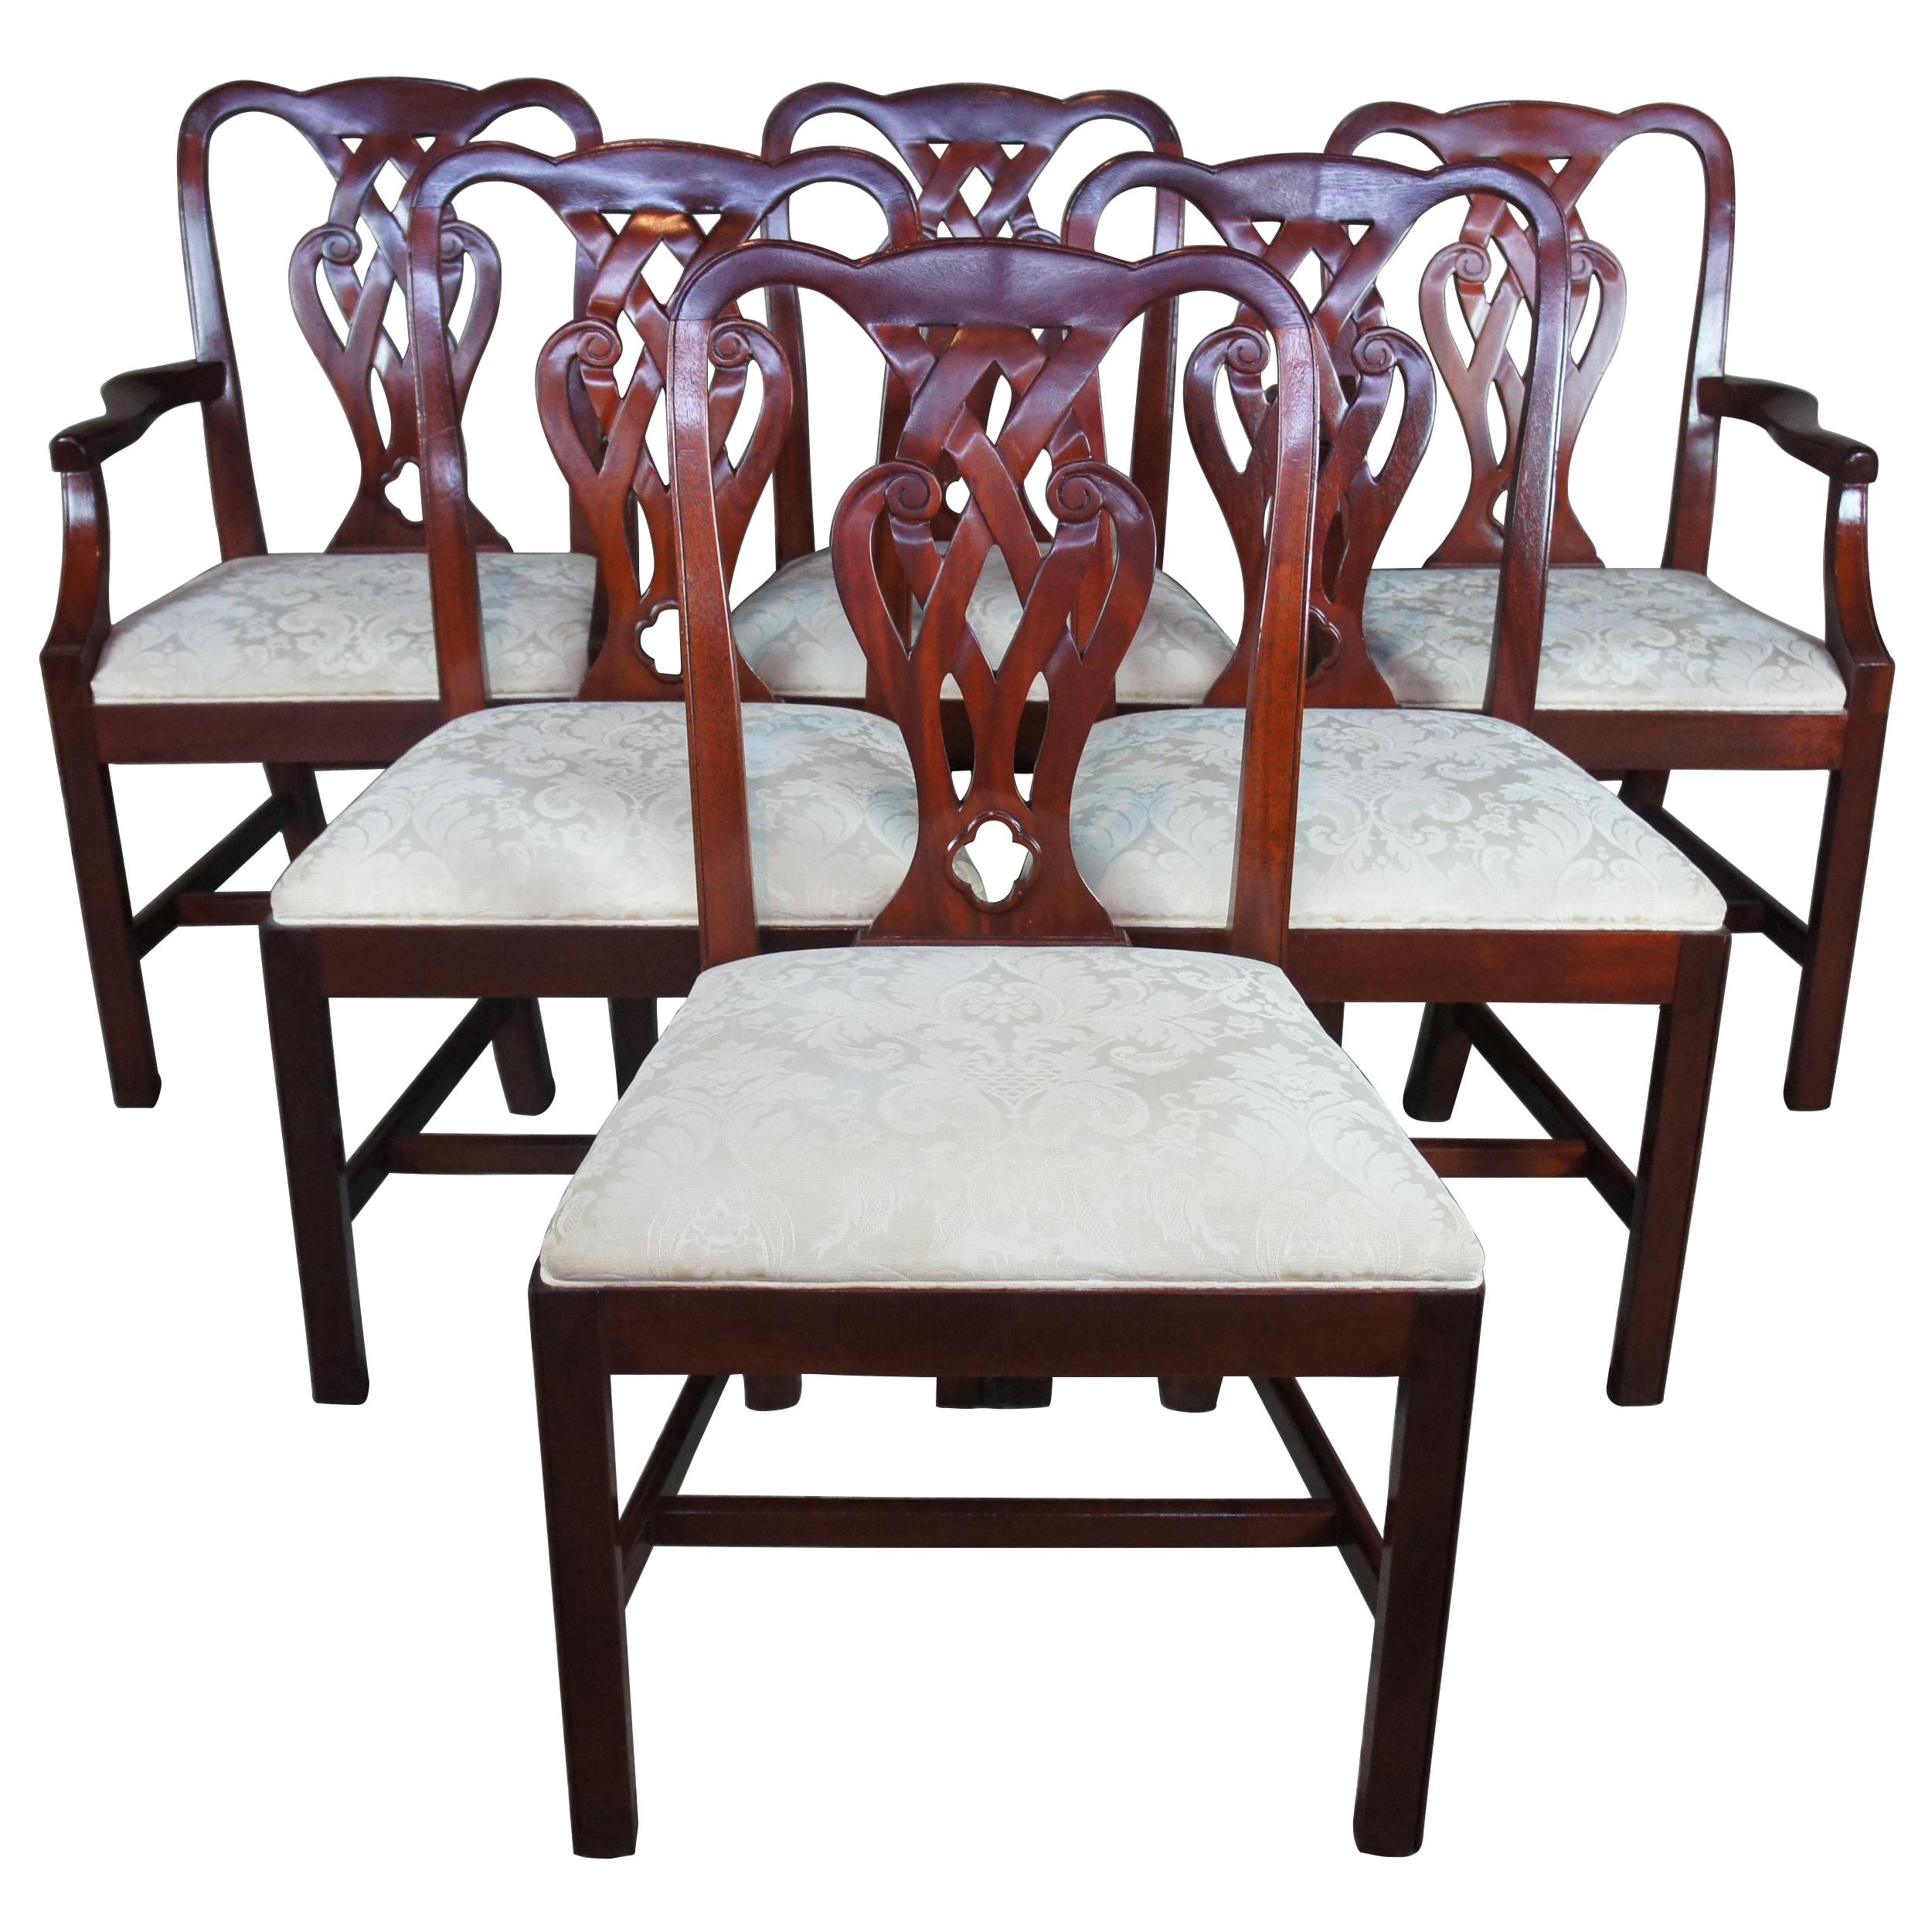 6 Vintage Baker Chippendale Style Pretzel Back Mahogany Dining Chairs